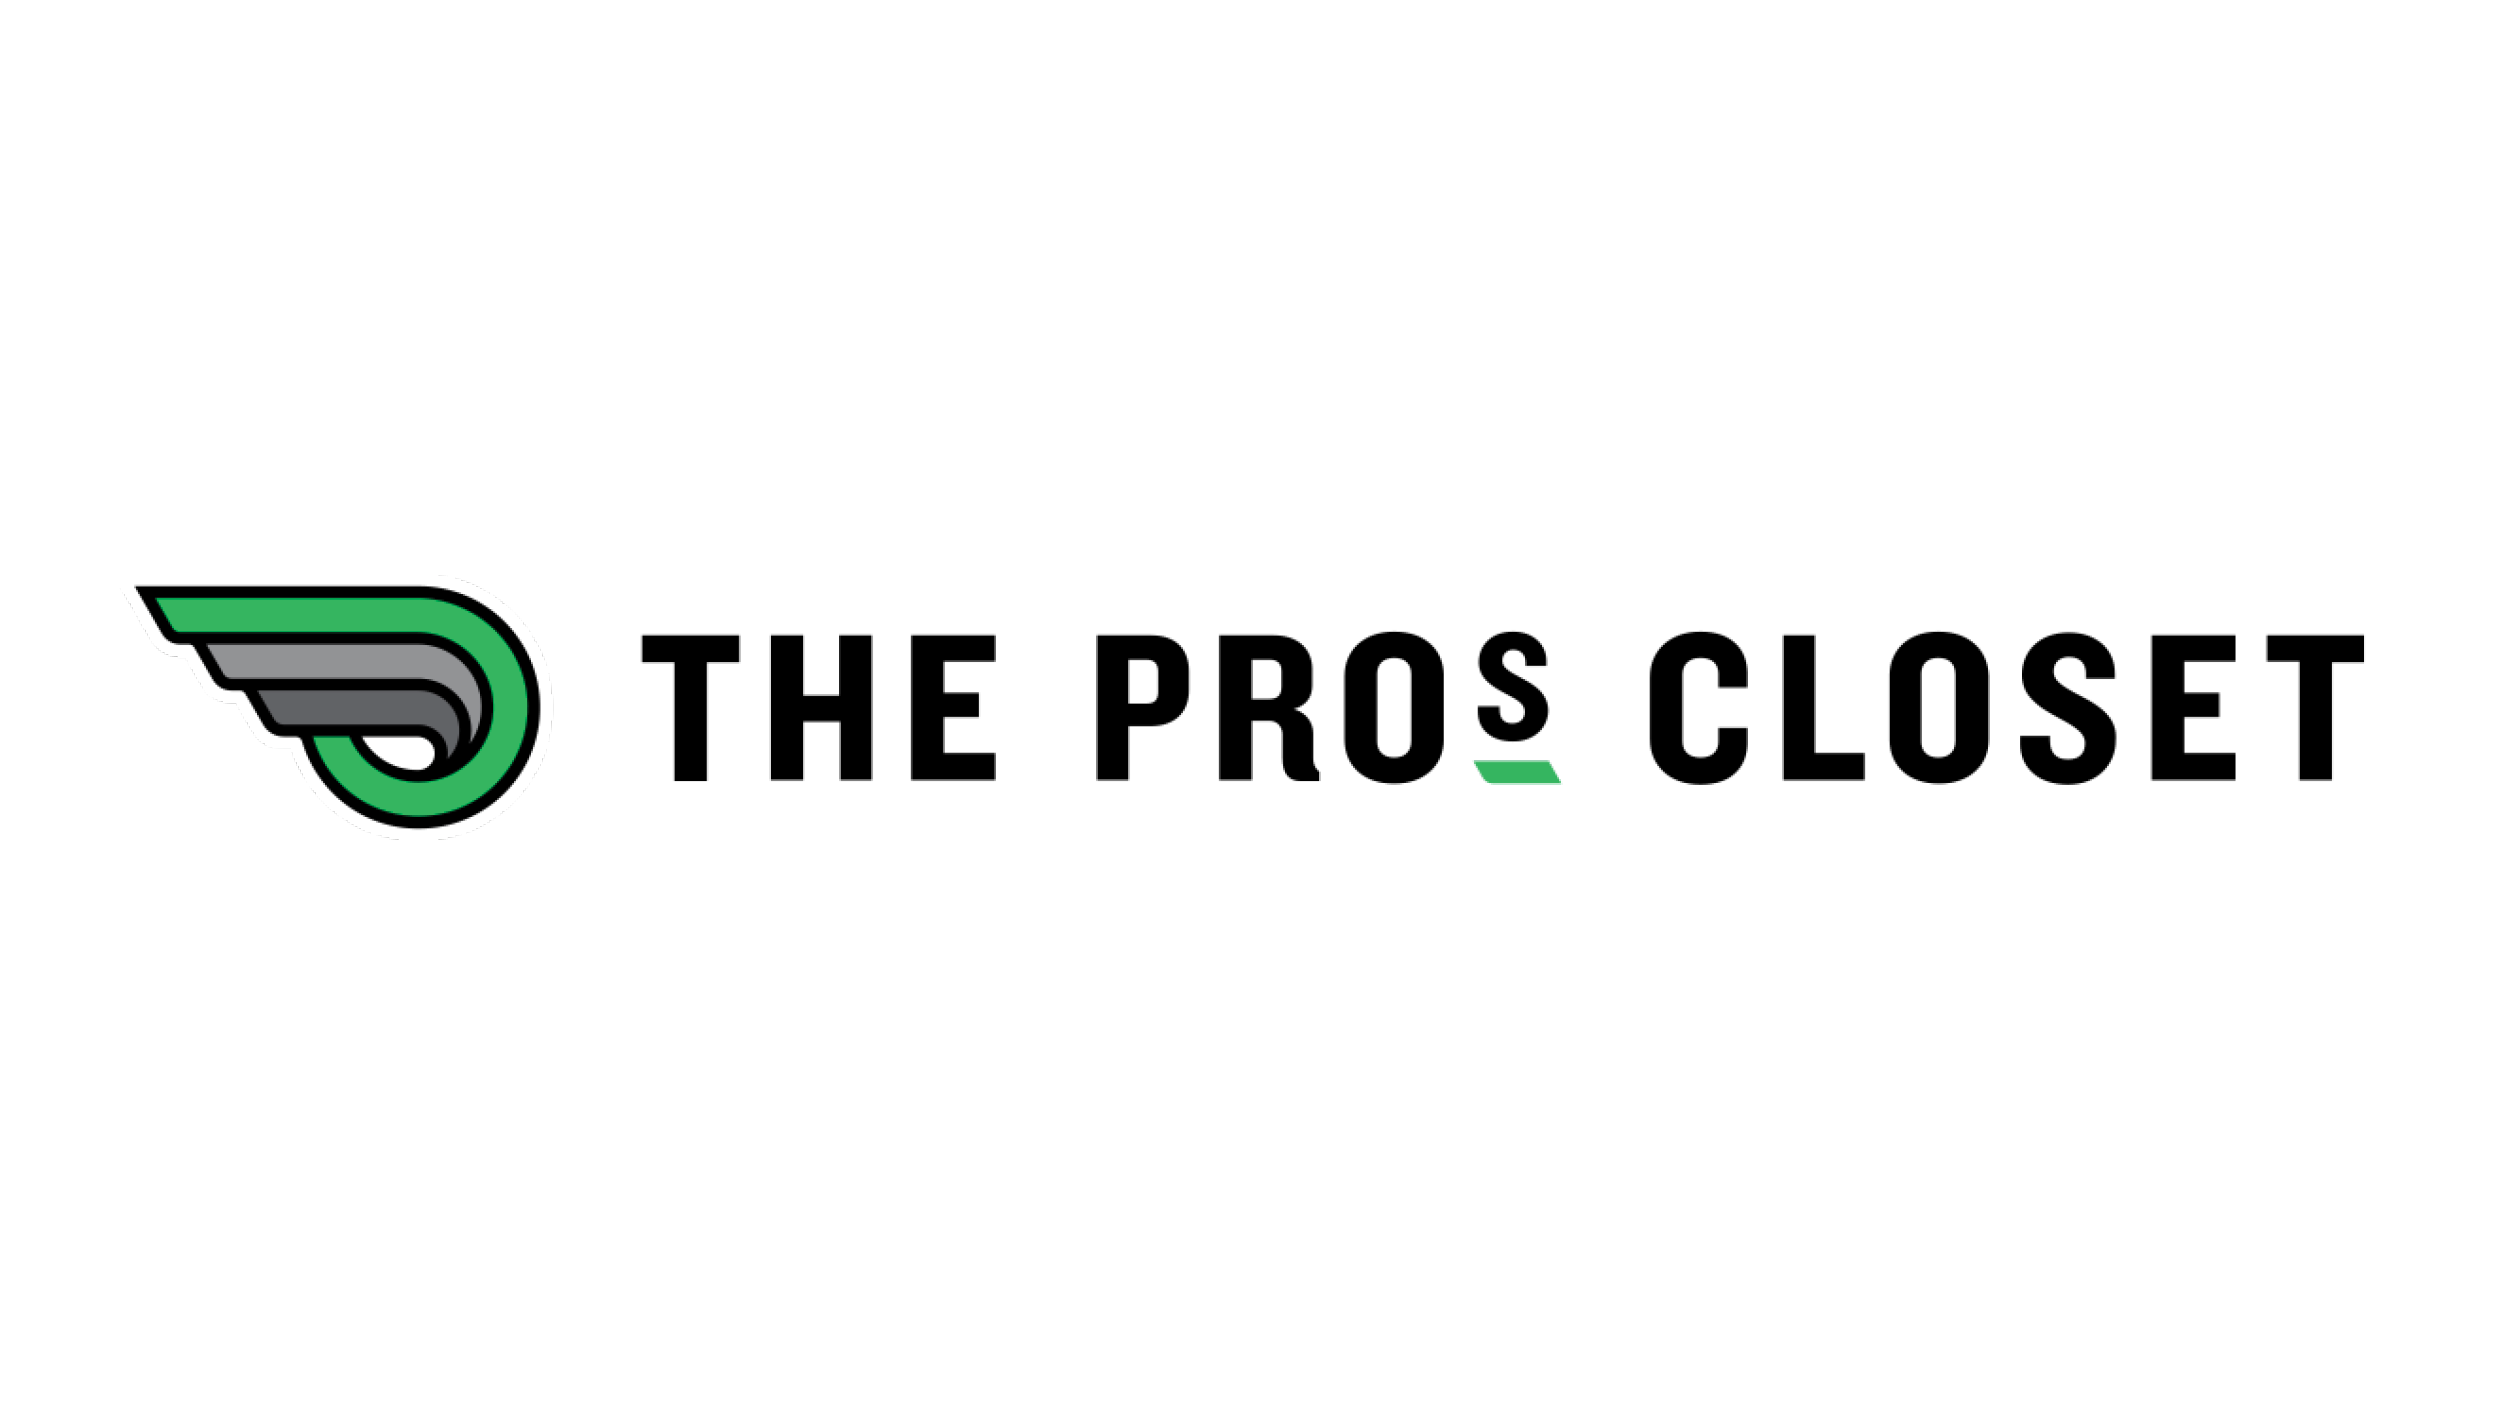 Why We Invested in The Pro's Closet